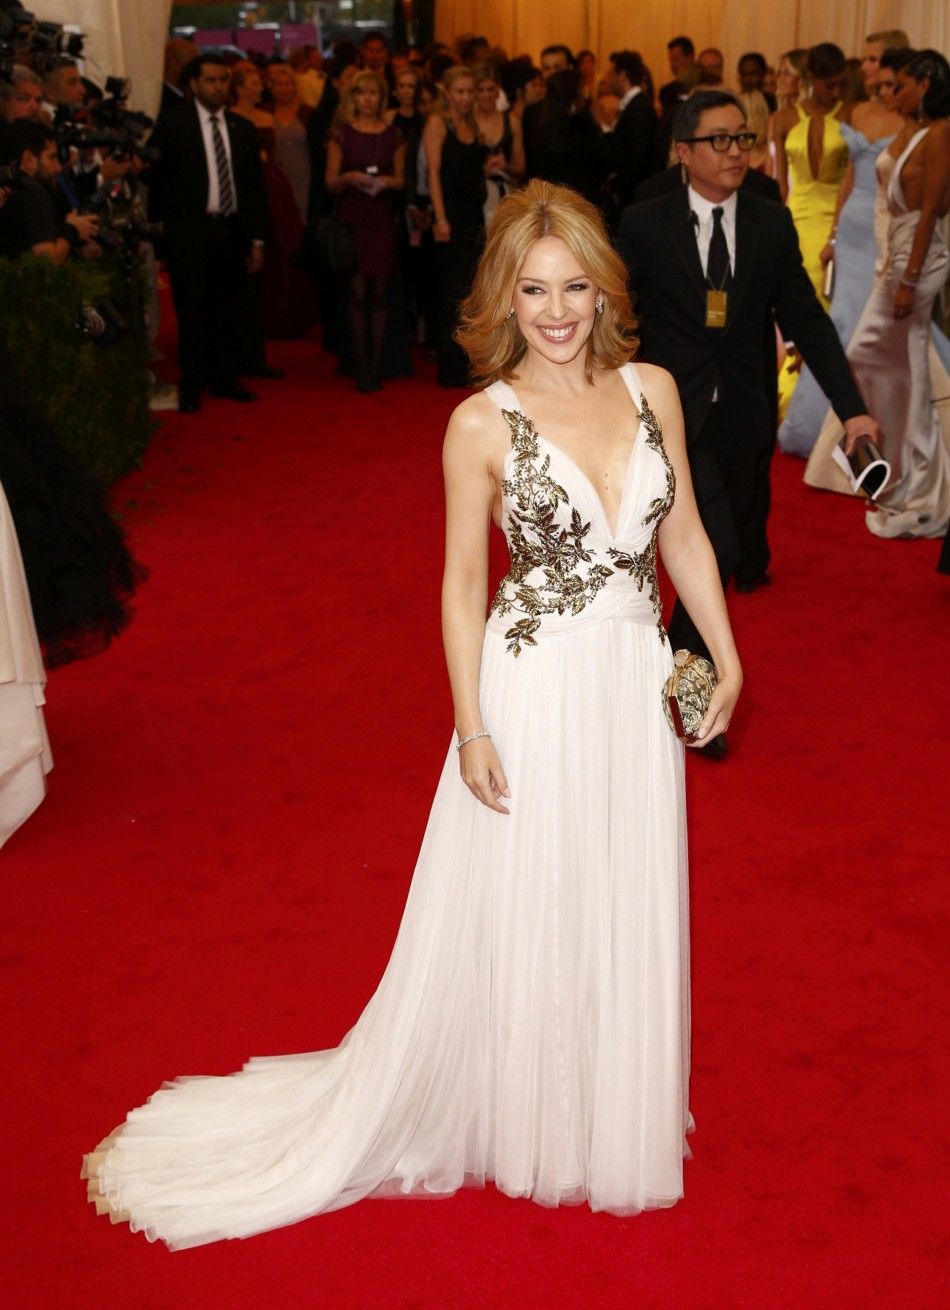 Kylie Minogue arrives at the Metropolitan Museum of Art Costume Institute Gala Benefit in New York